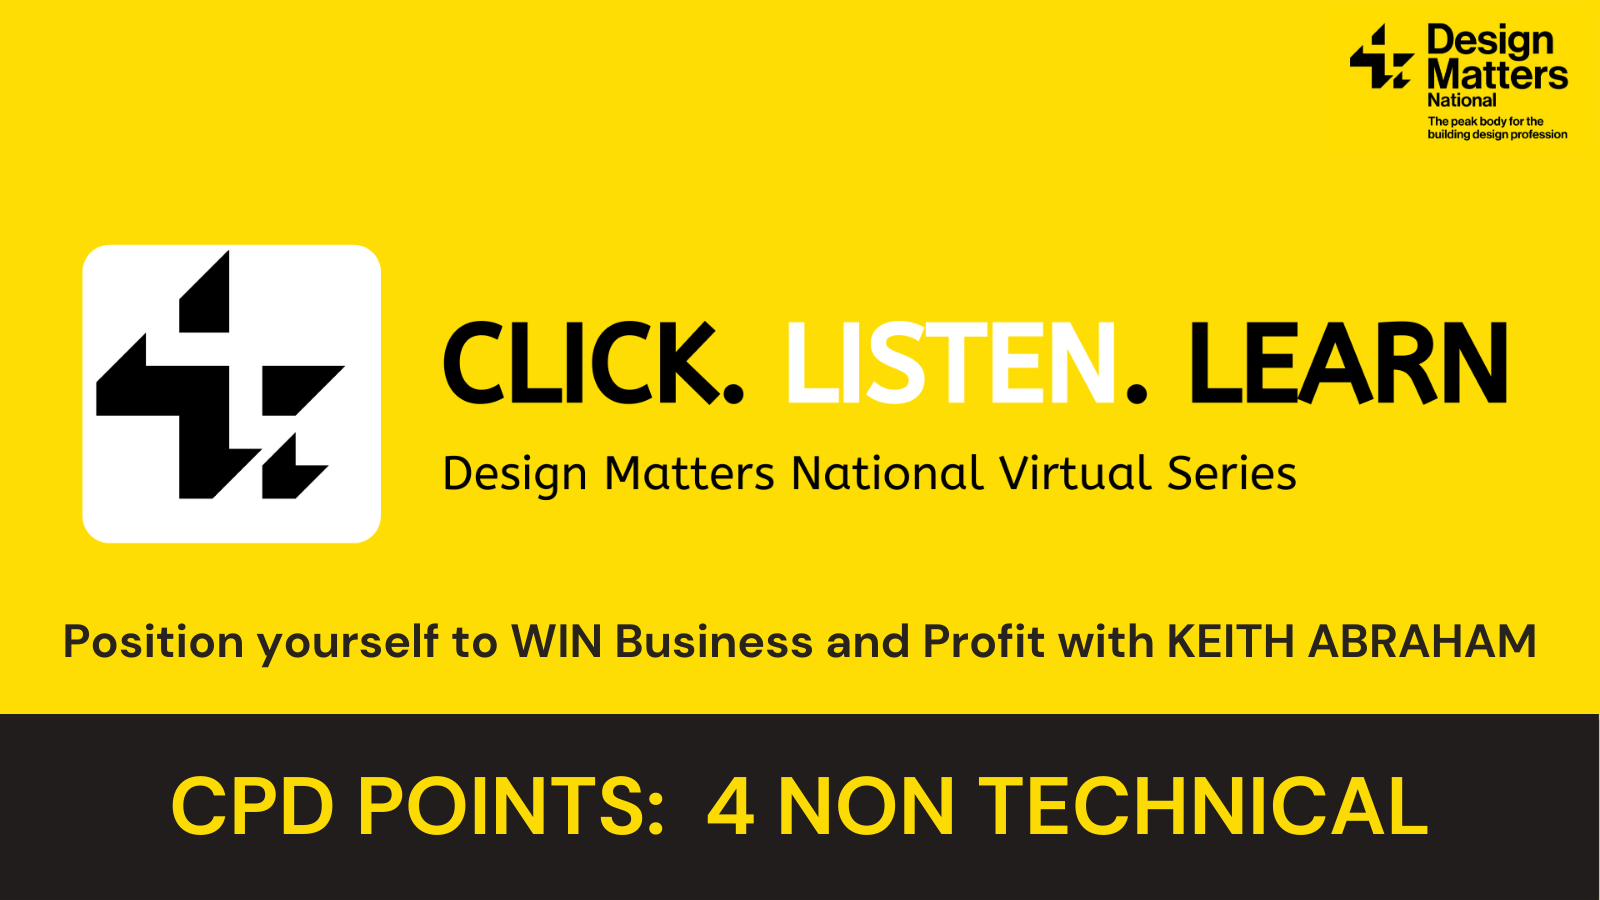 Position Yourself - Win Business & Profit with Keith Abraham